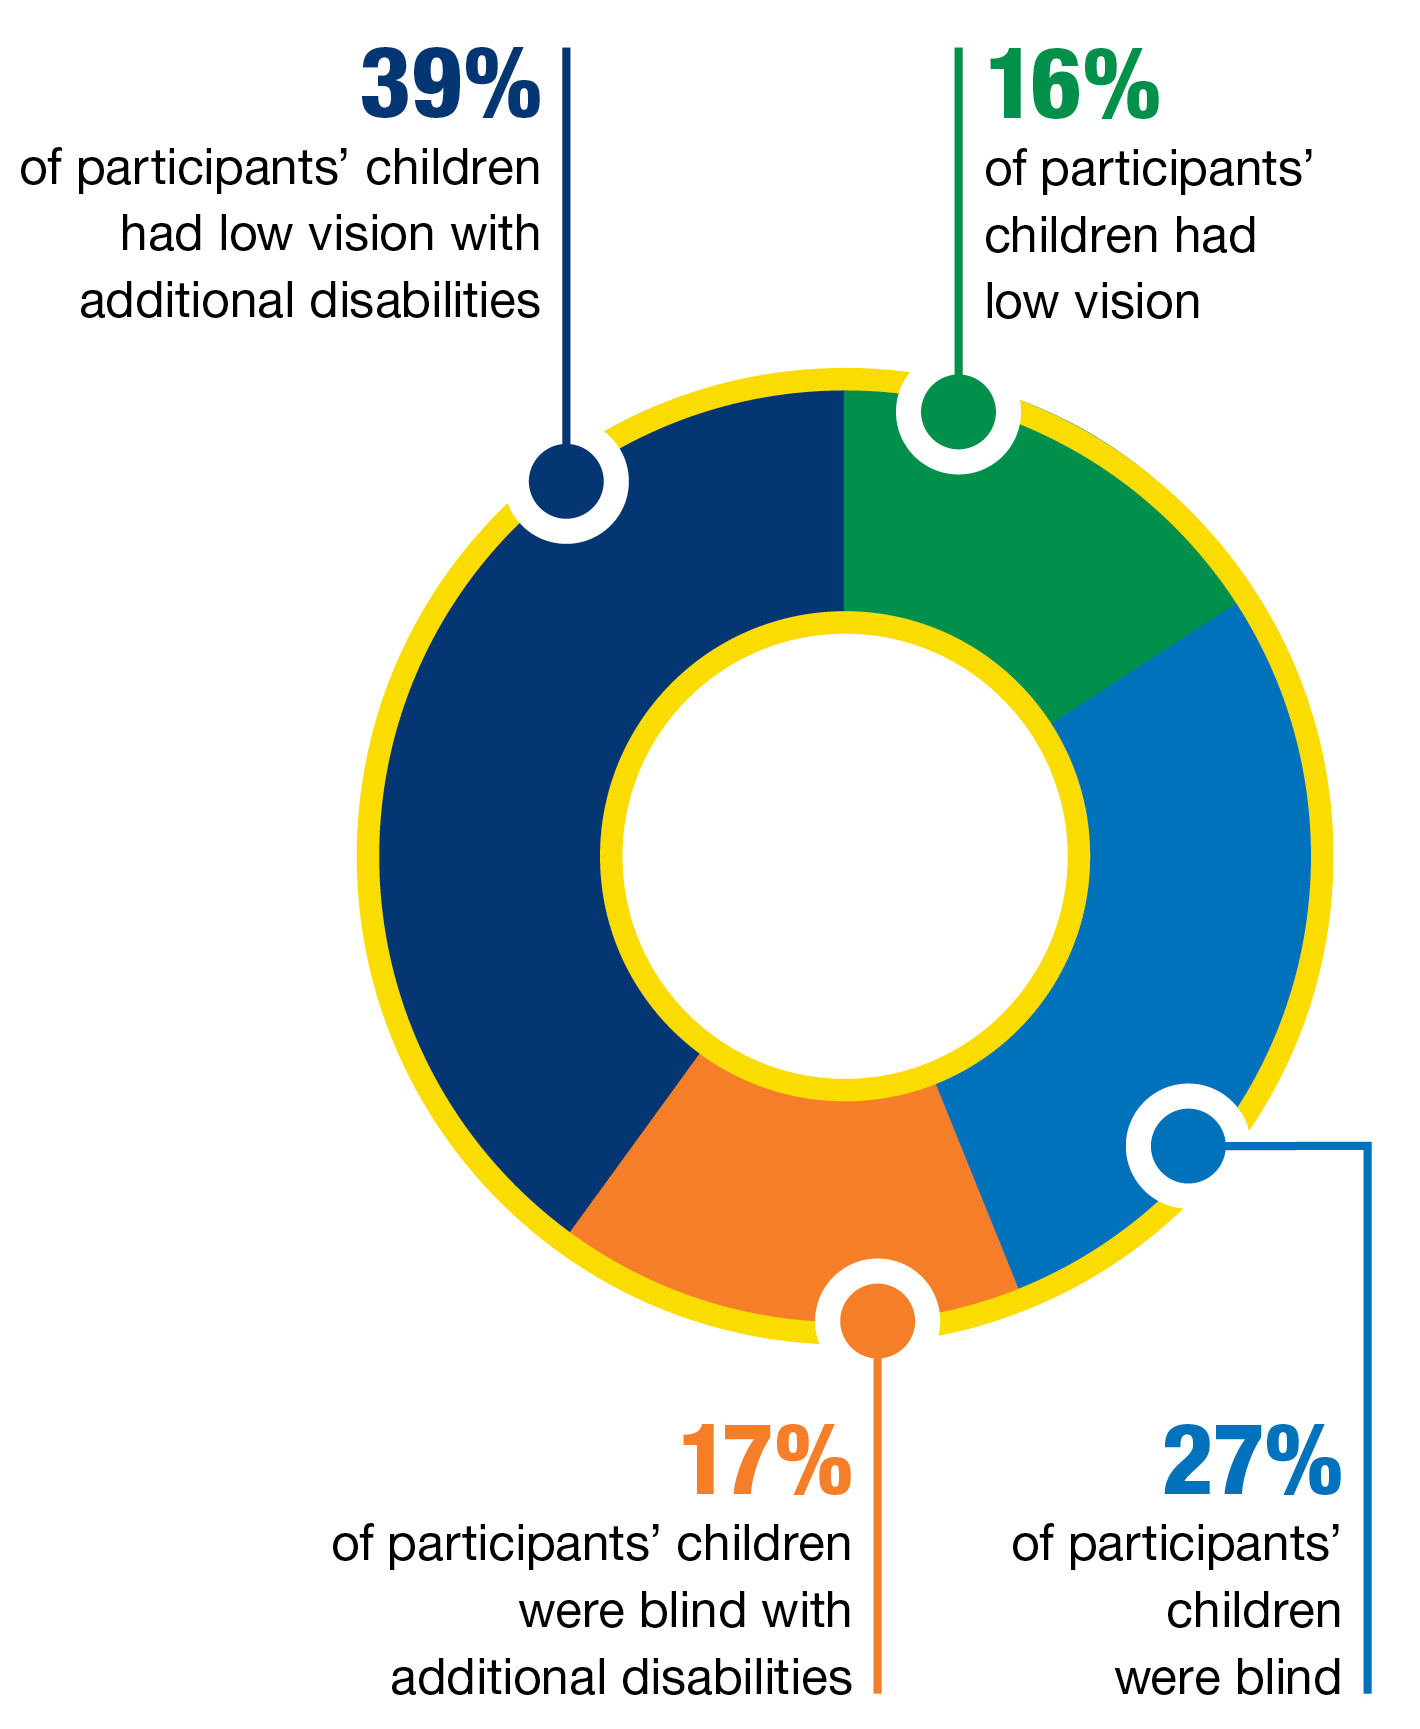 Pie chart showing the characteristics of children represented in the study. 39% of participants’ children had low vision with additional disabilities, 16% had low vision, 27% were blind, and 17% were blind with additional disabilities. 